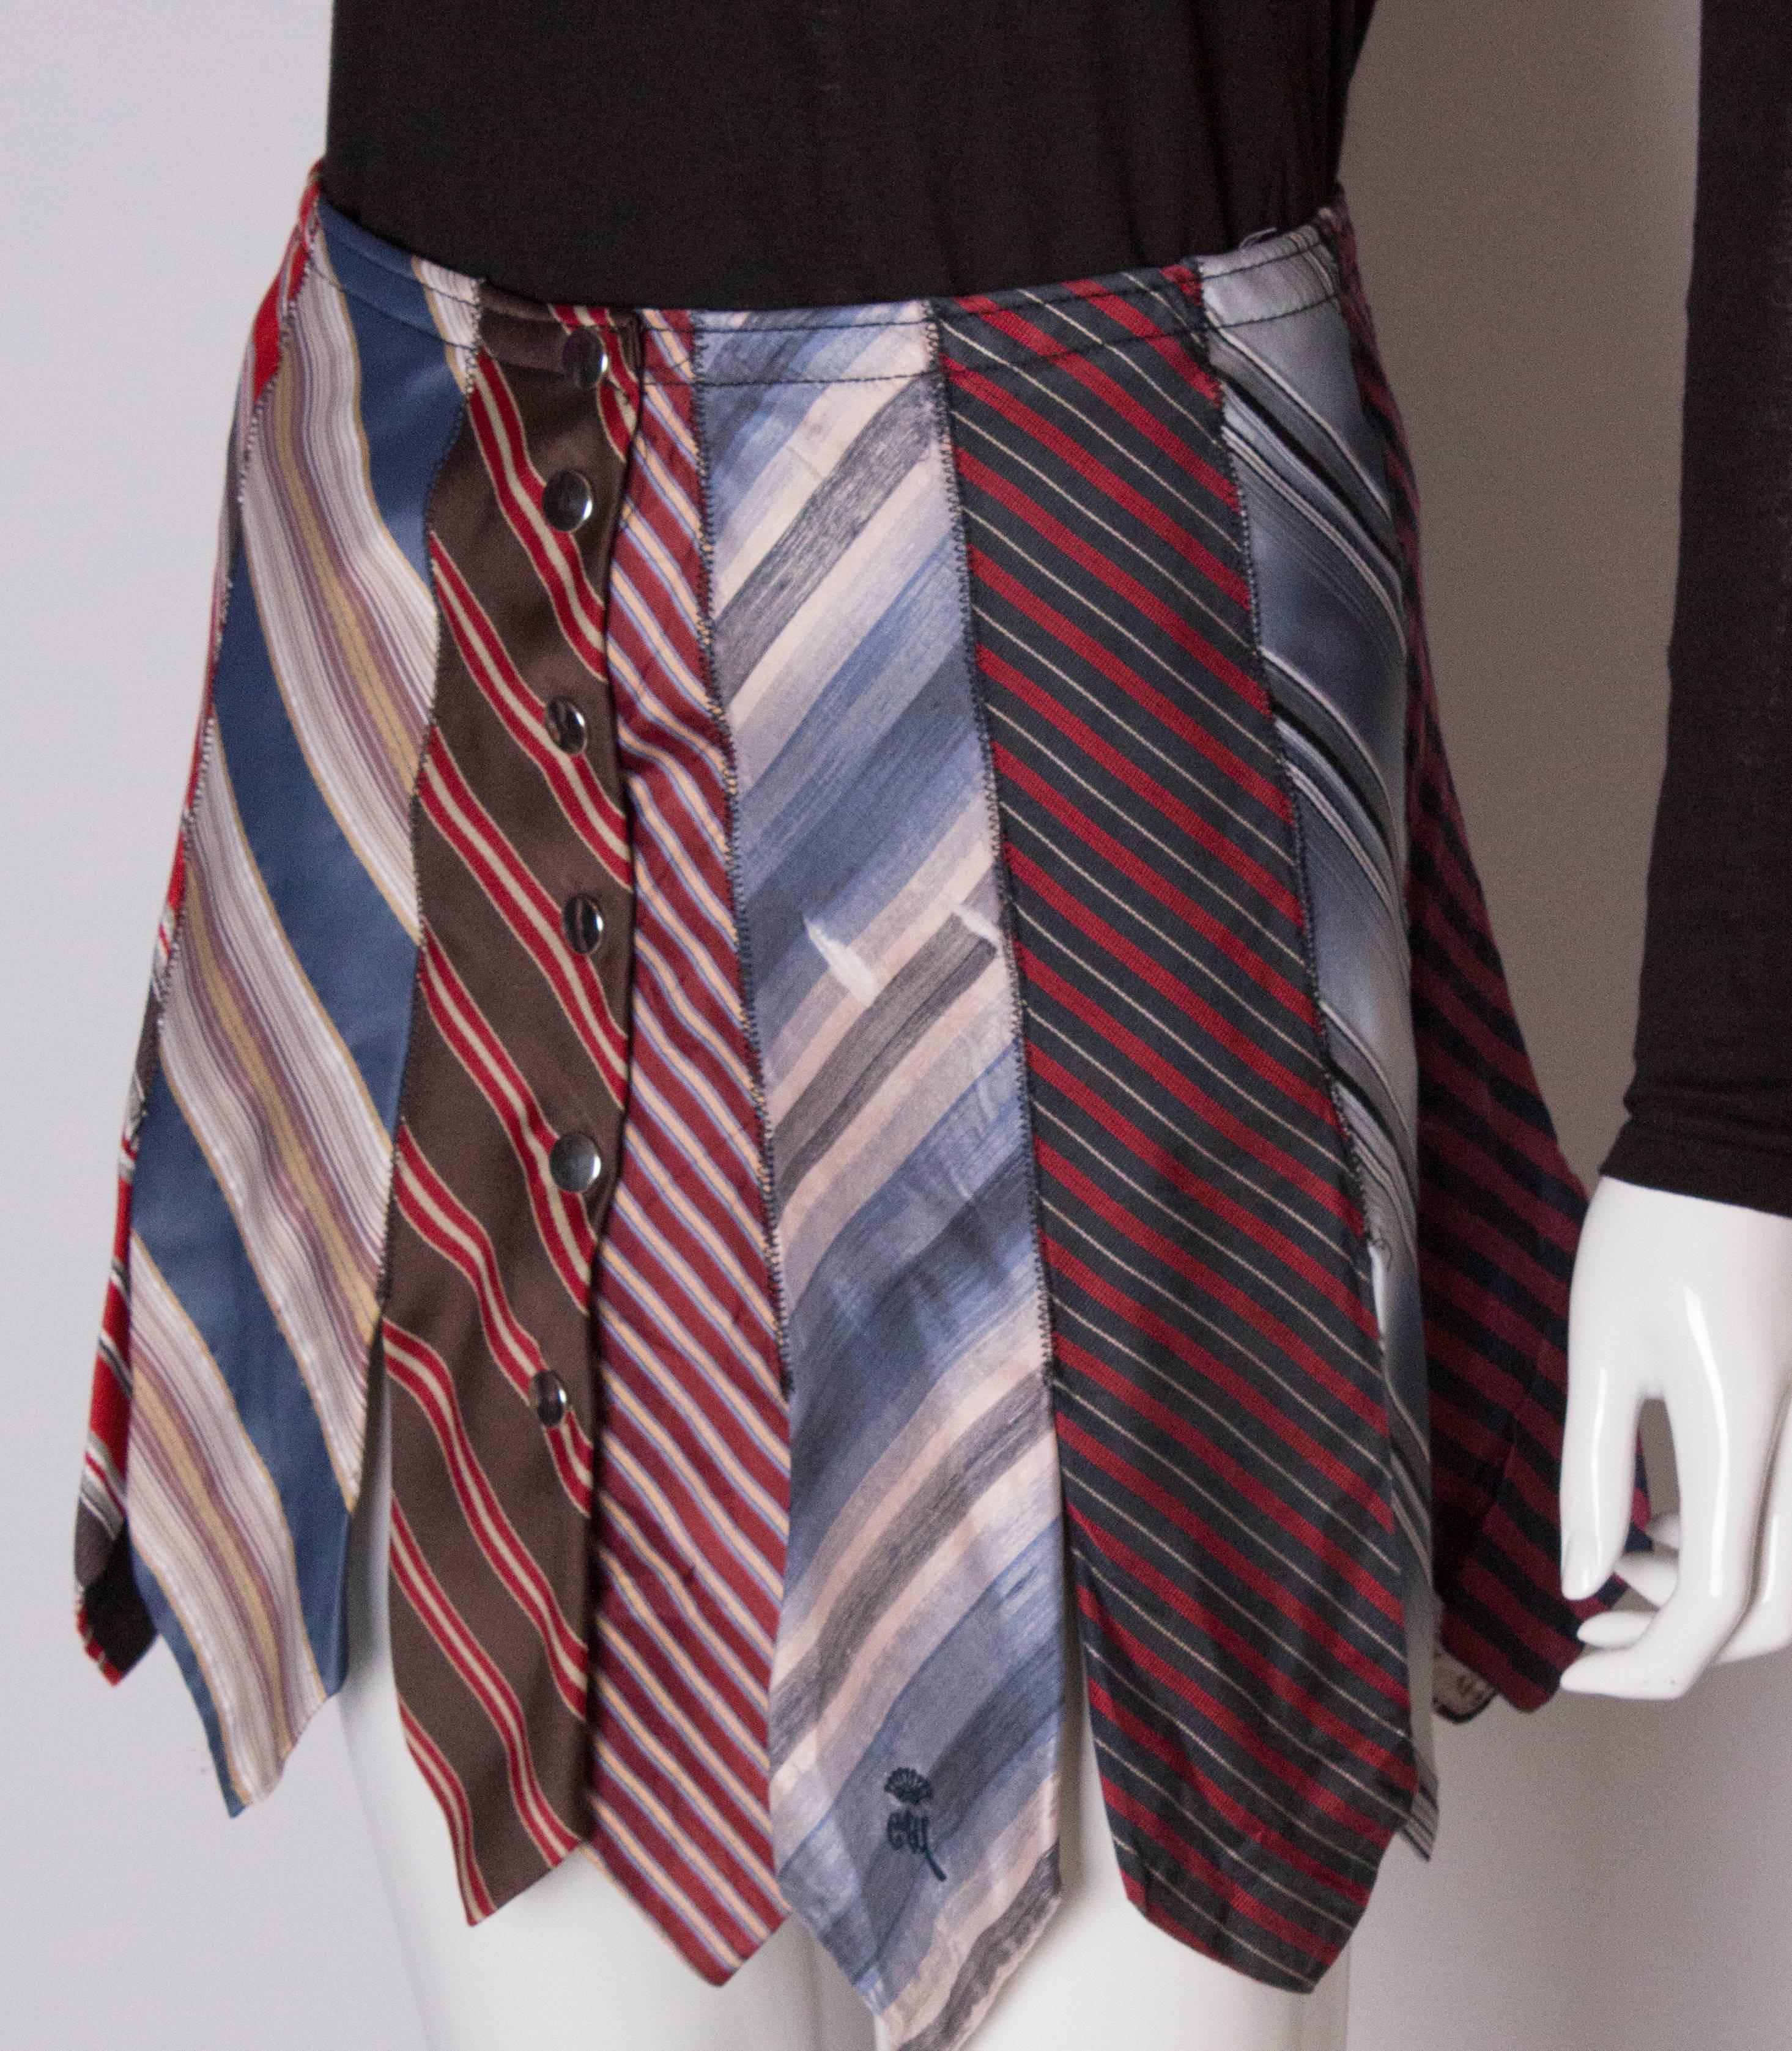 skirt made from ties